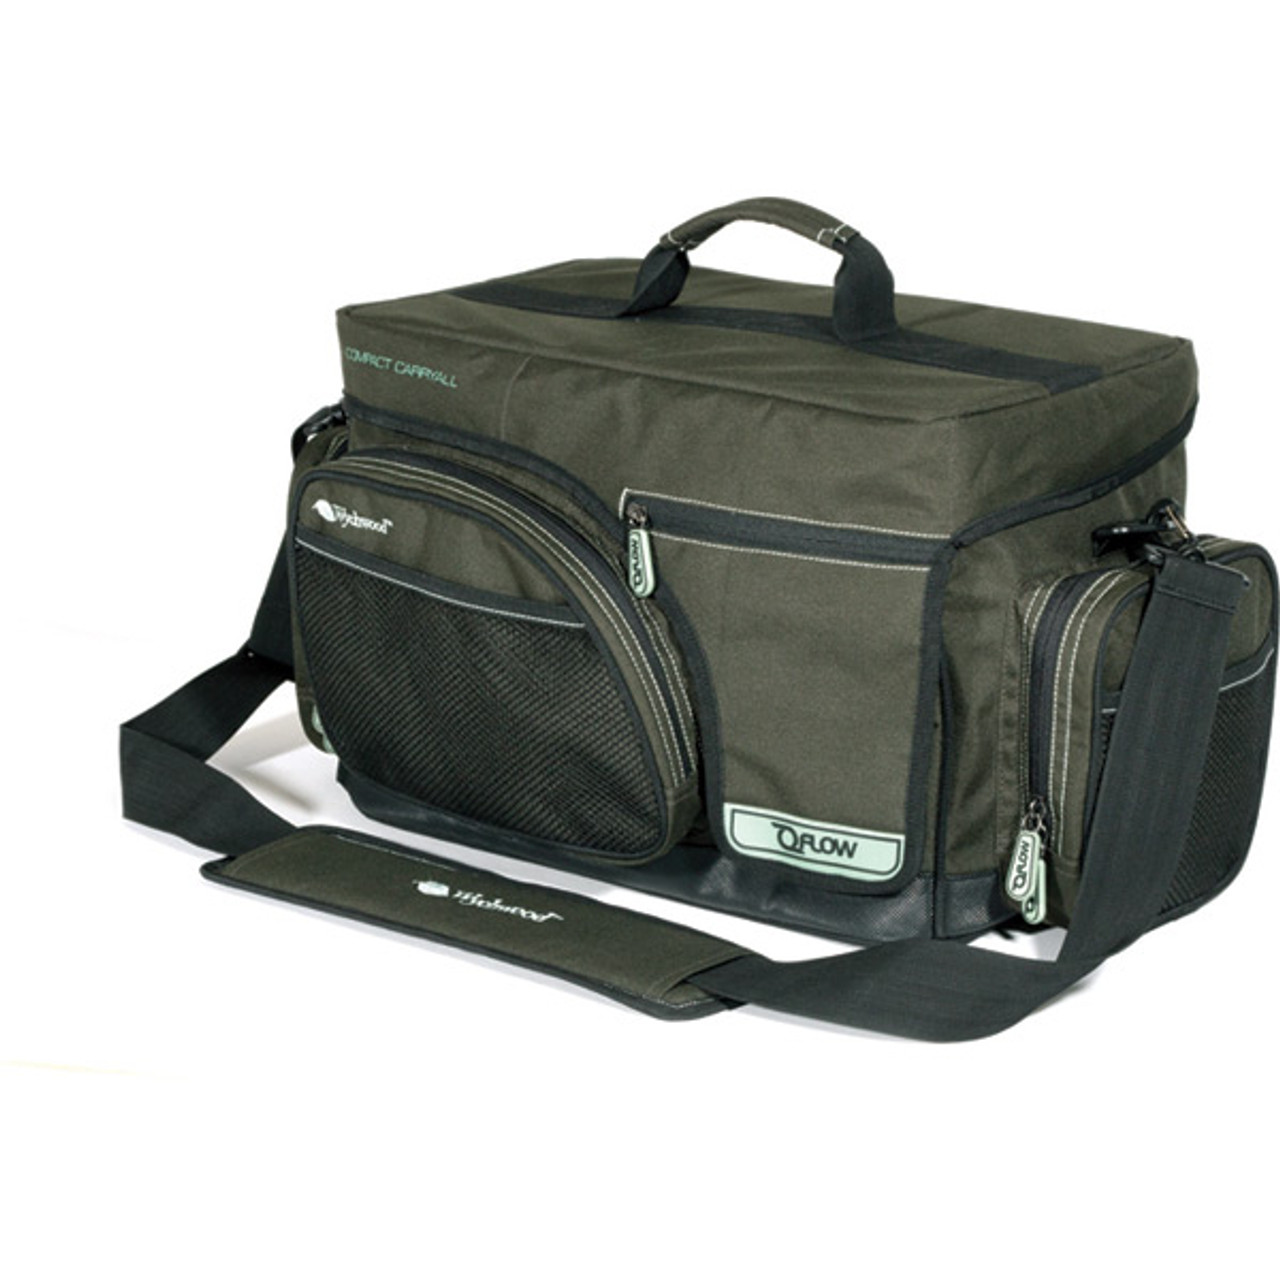 Wychwood Compact Carryall Tackle Bag - Keen's Tackle and Guns